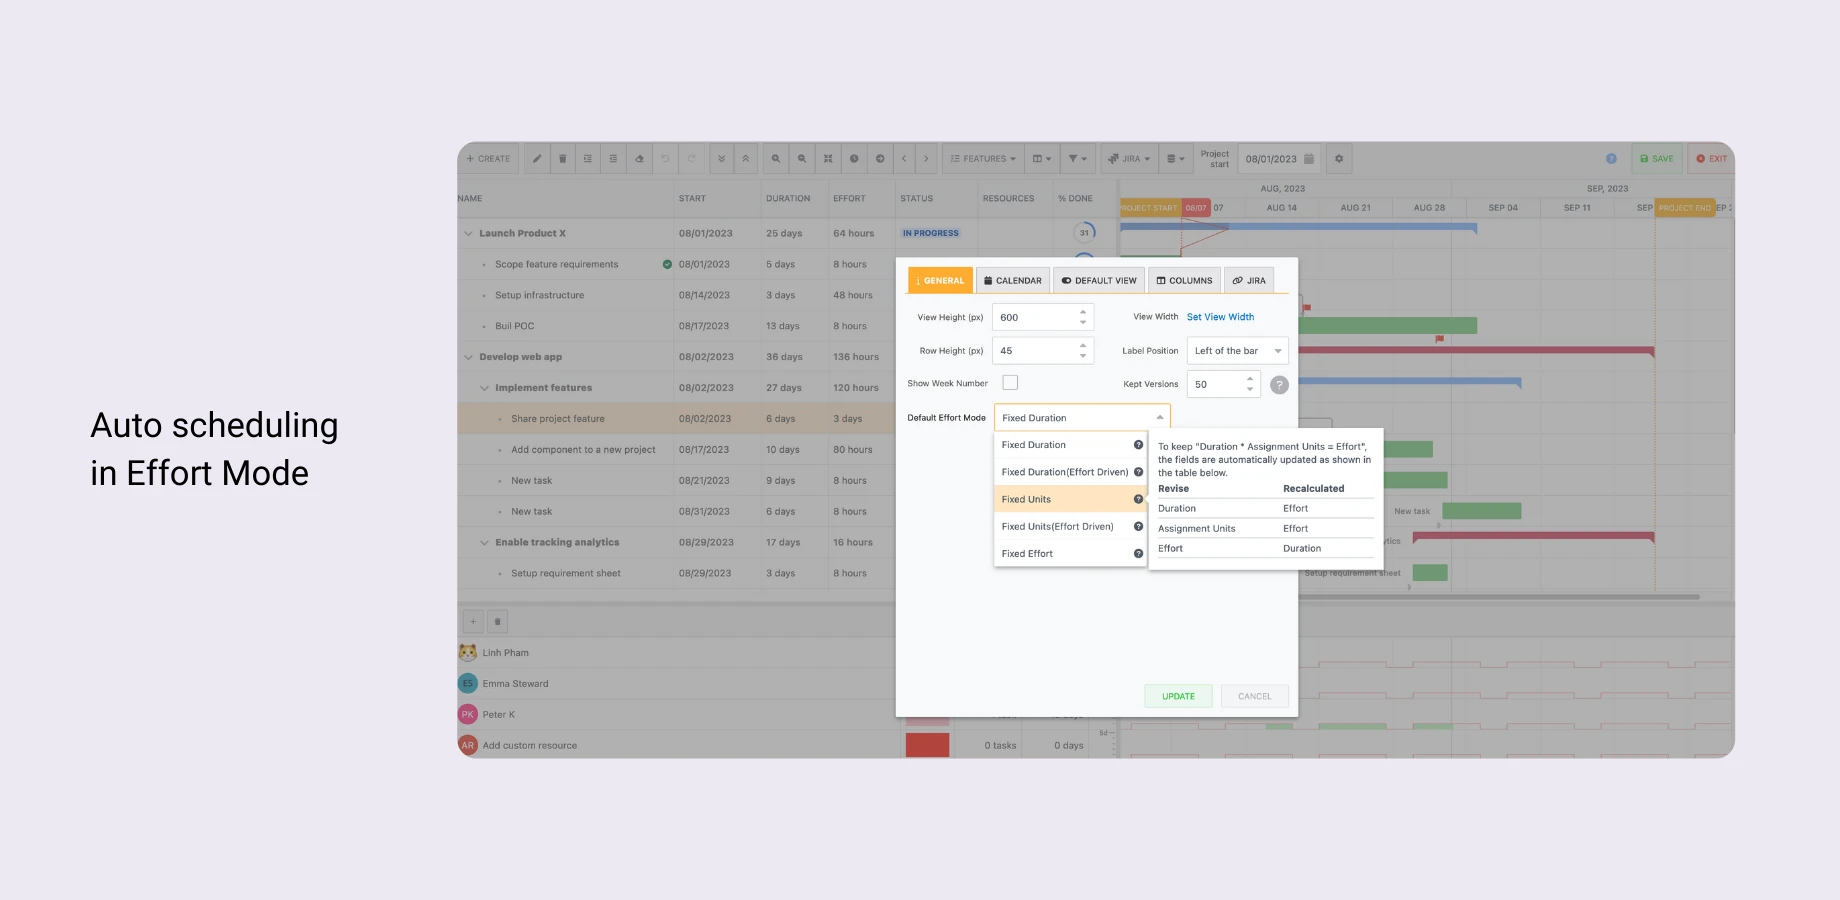 Auto-scheduling tasks based on efforts, resources, and duration.